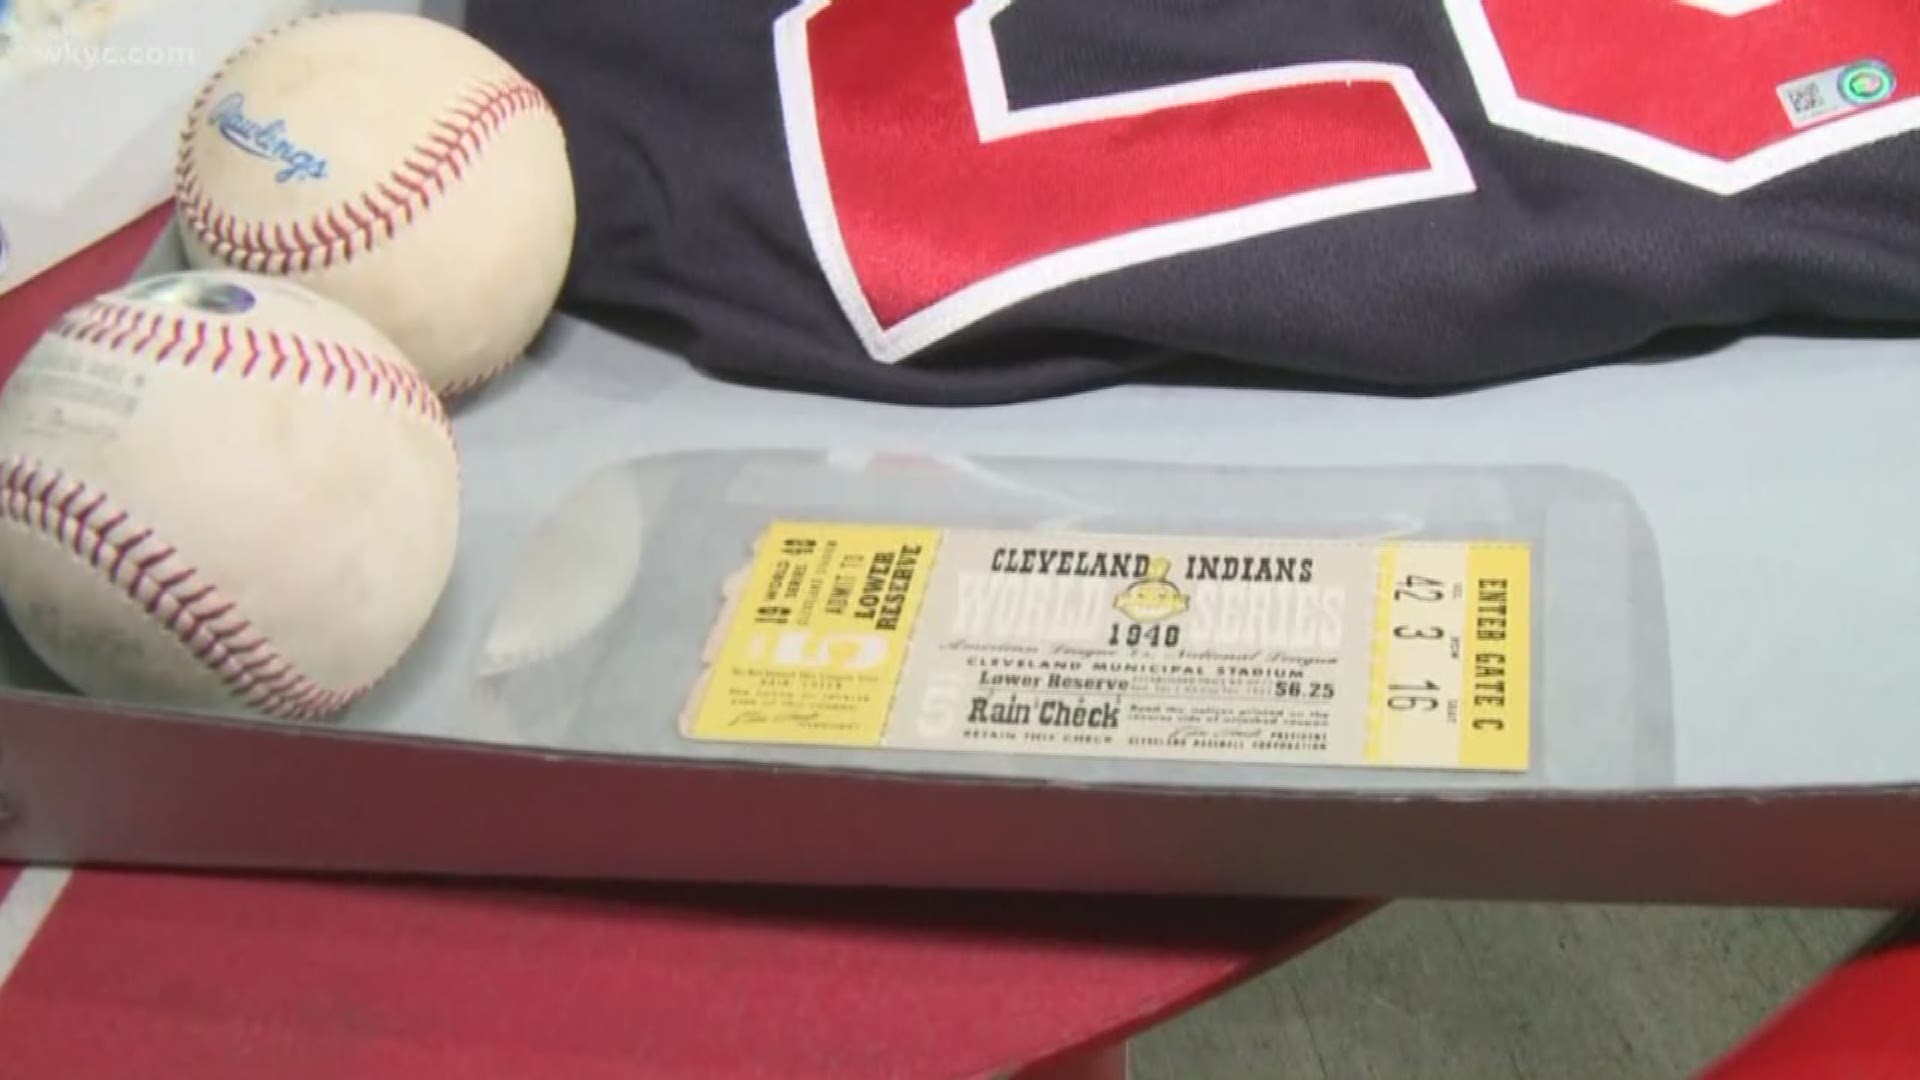 Oct. 8, 2018: We take a close look at some important items from Cleveland Indians history -- including a ticket from the 1948 World Series.